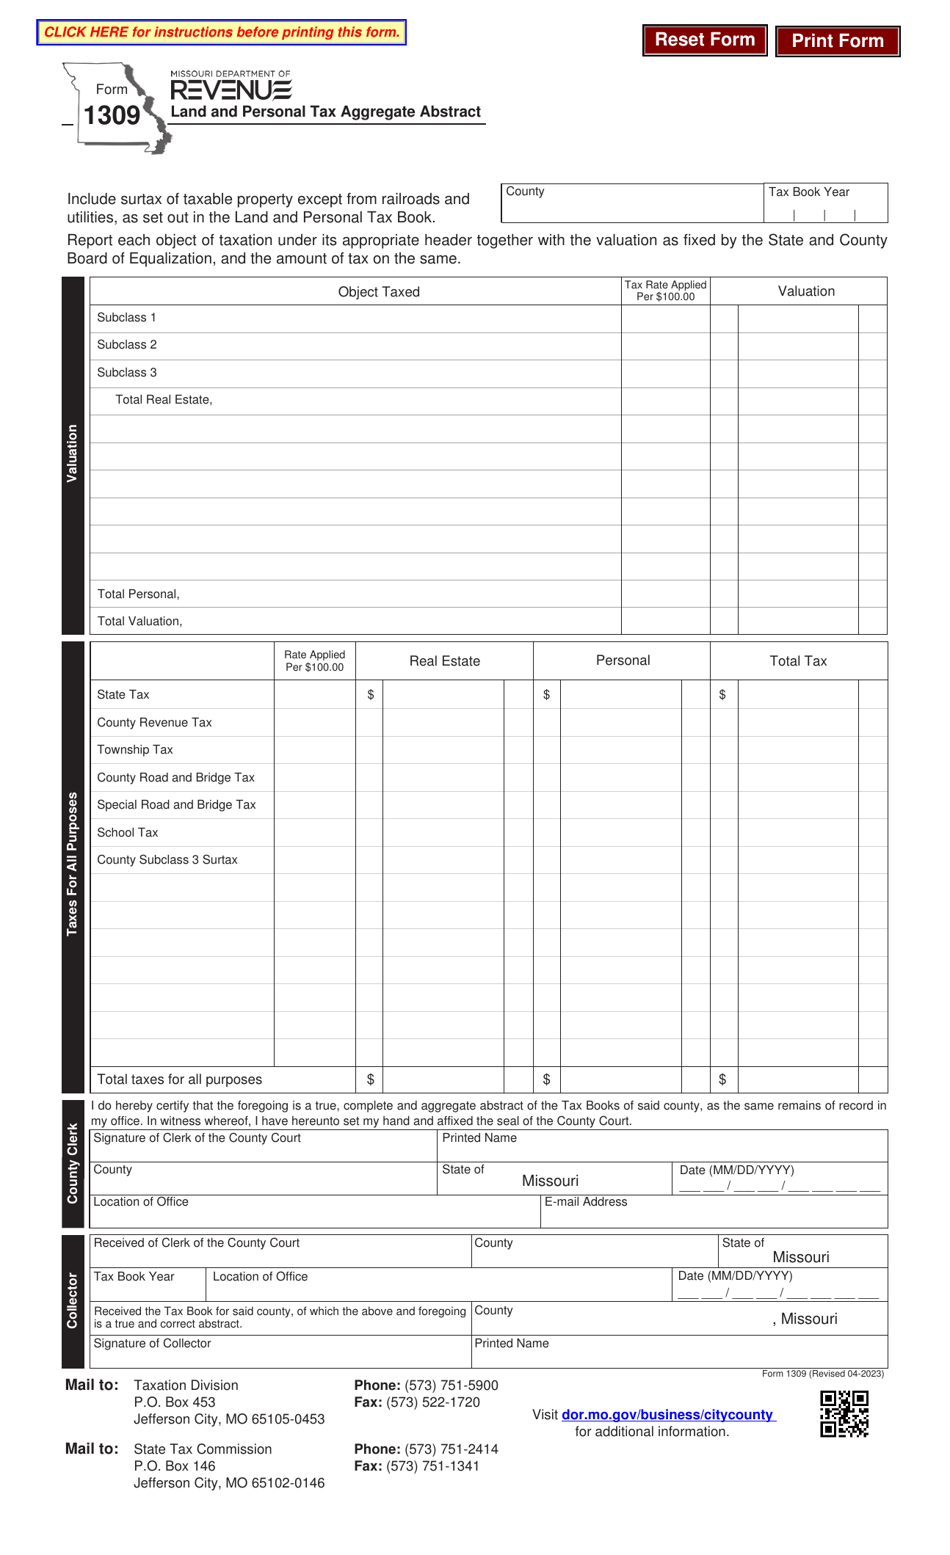 Form 1309 Land and Personal Tax Aggregate Abstract - Missouri, Page 1